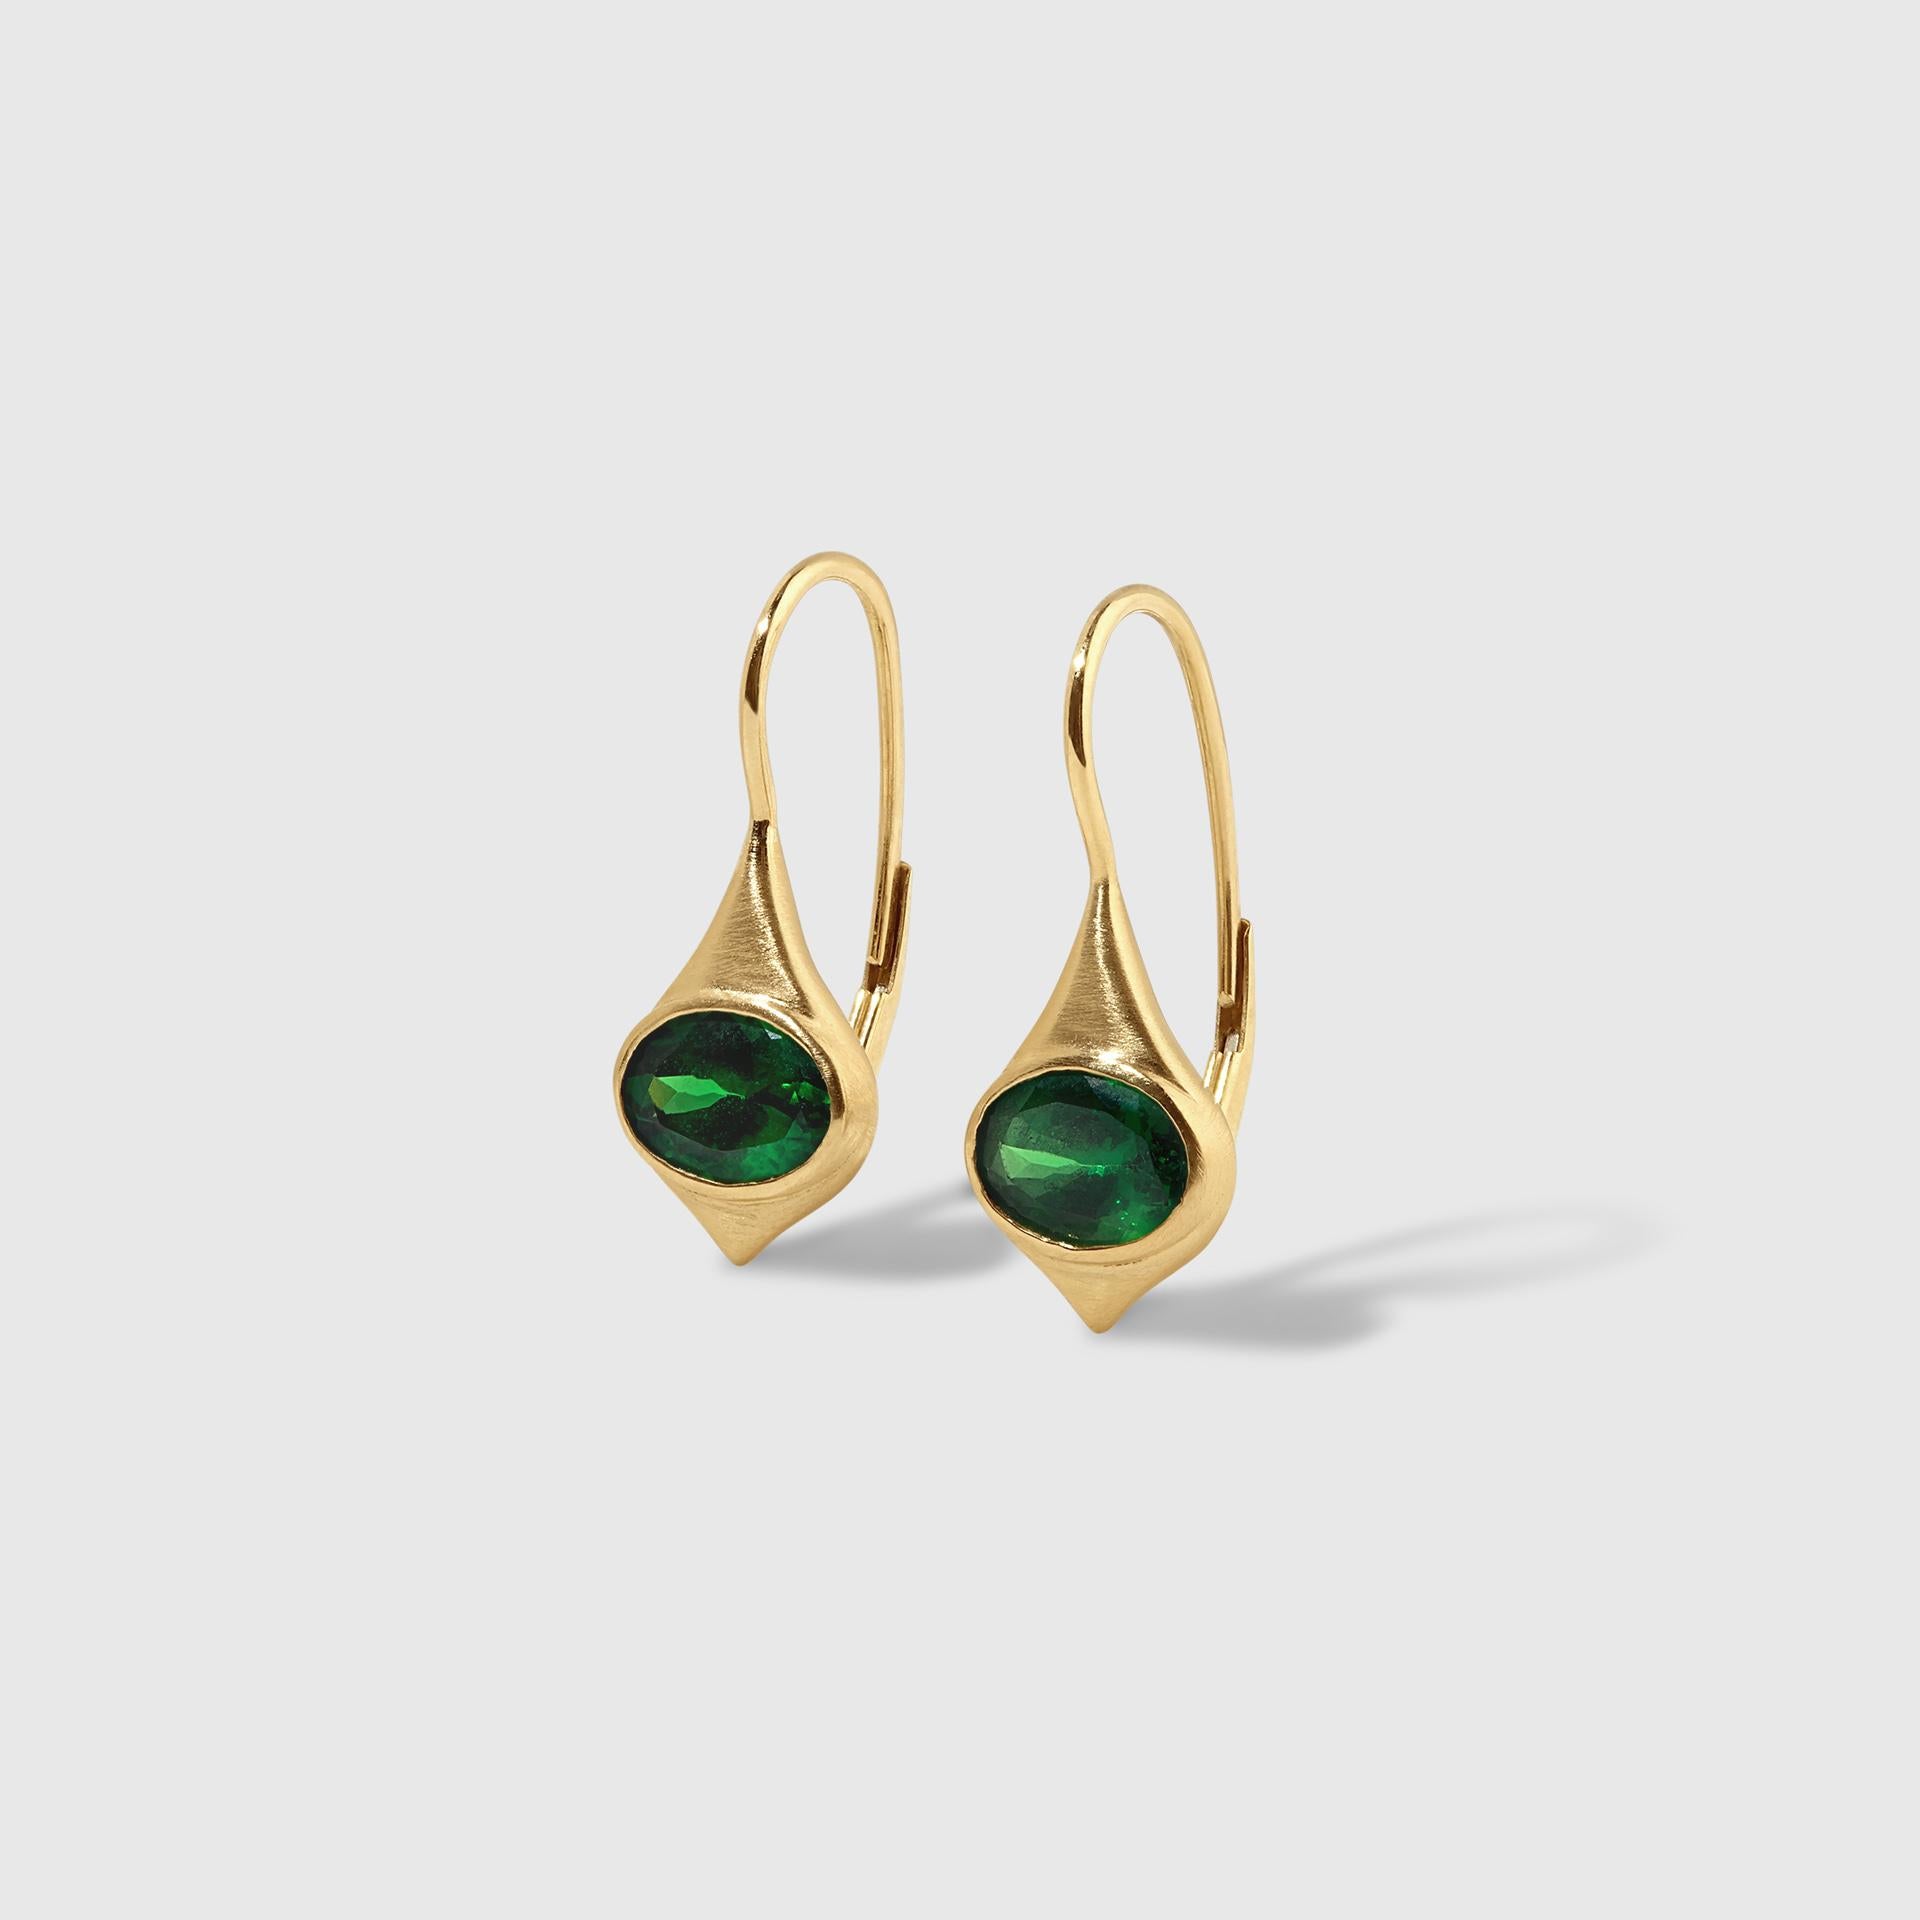 Droplette Earrings with East-West Bright Green, Oval Tsavorites, 18kt Gold In New Condition For Sale In Bozeman, MT